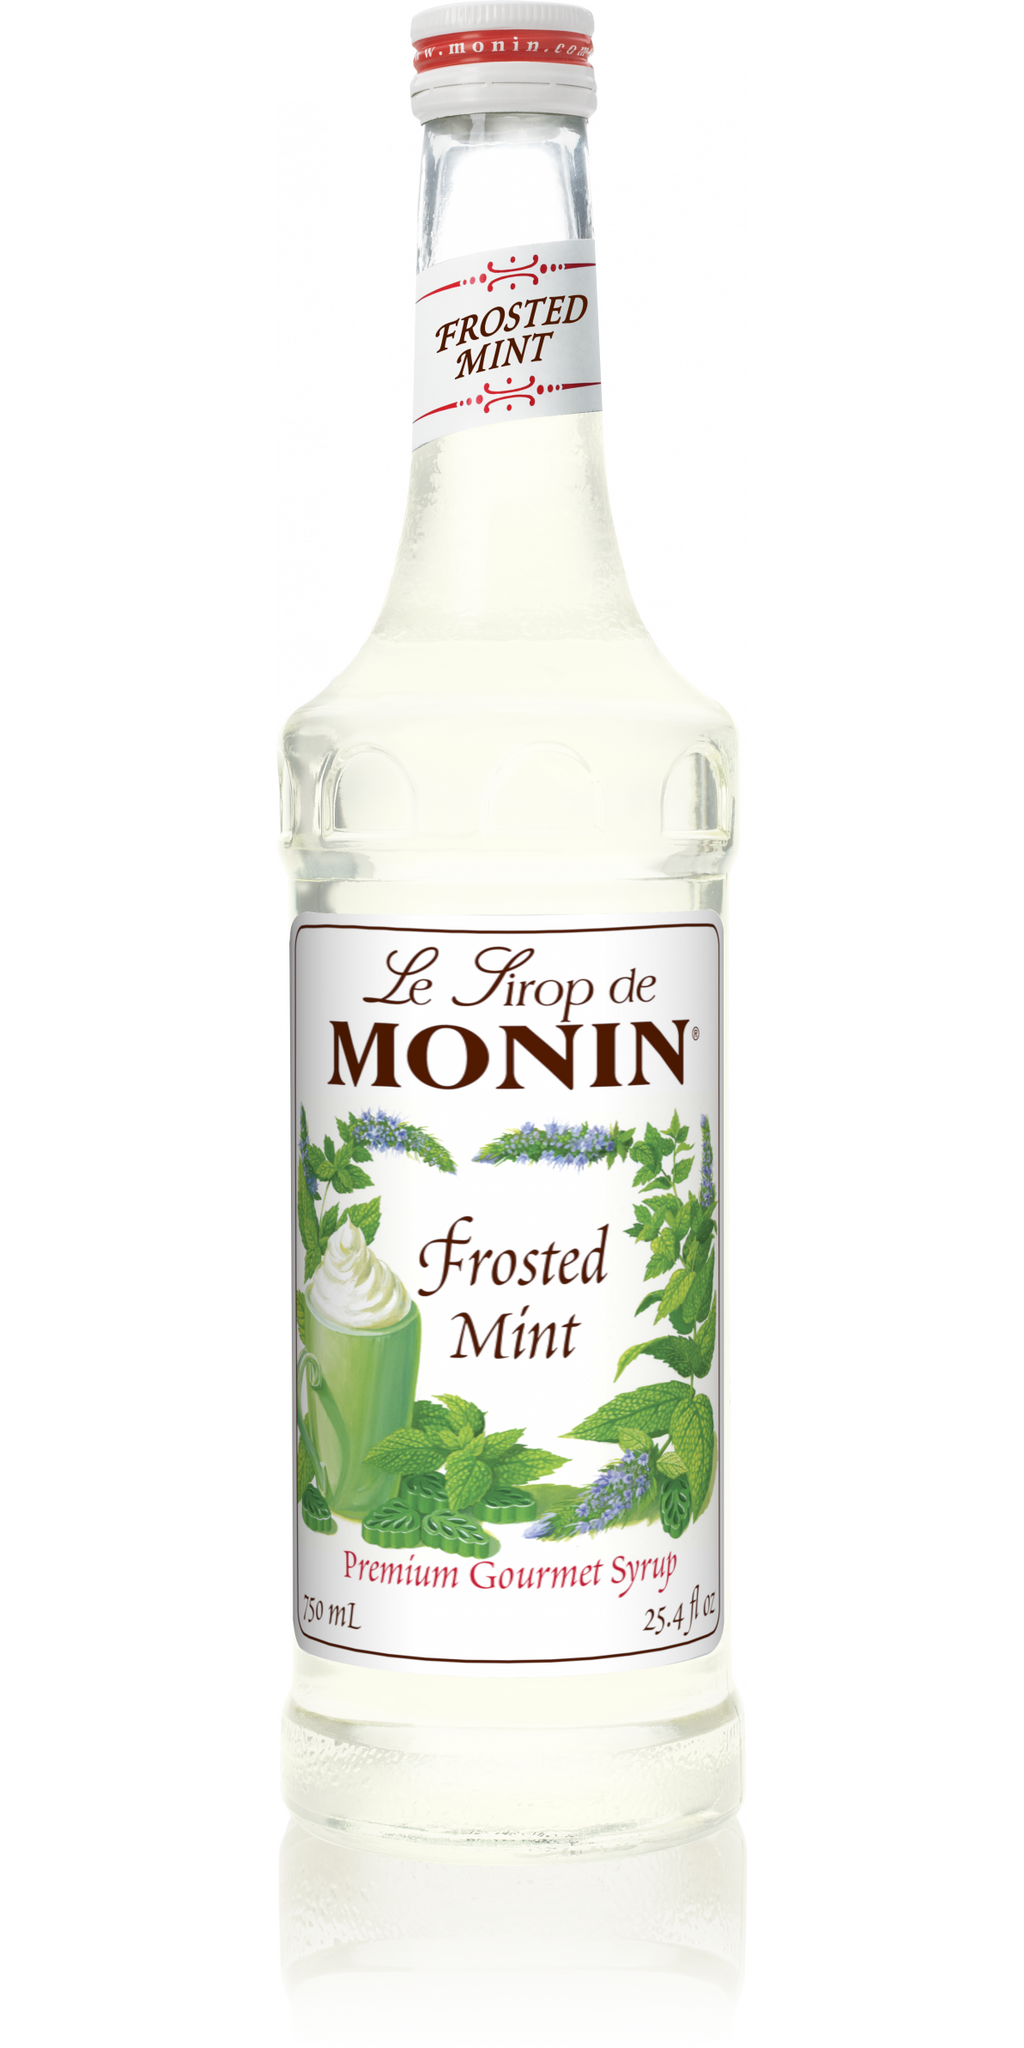 Monin Frosted Mint Syrup